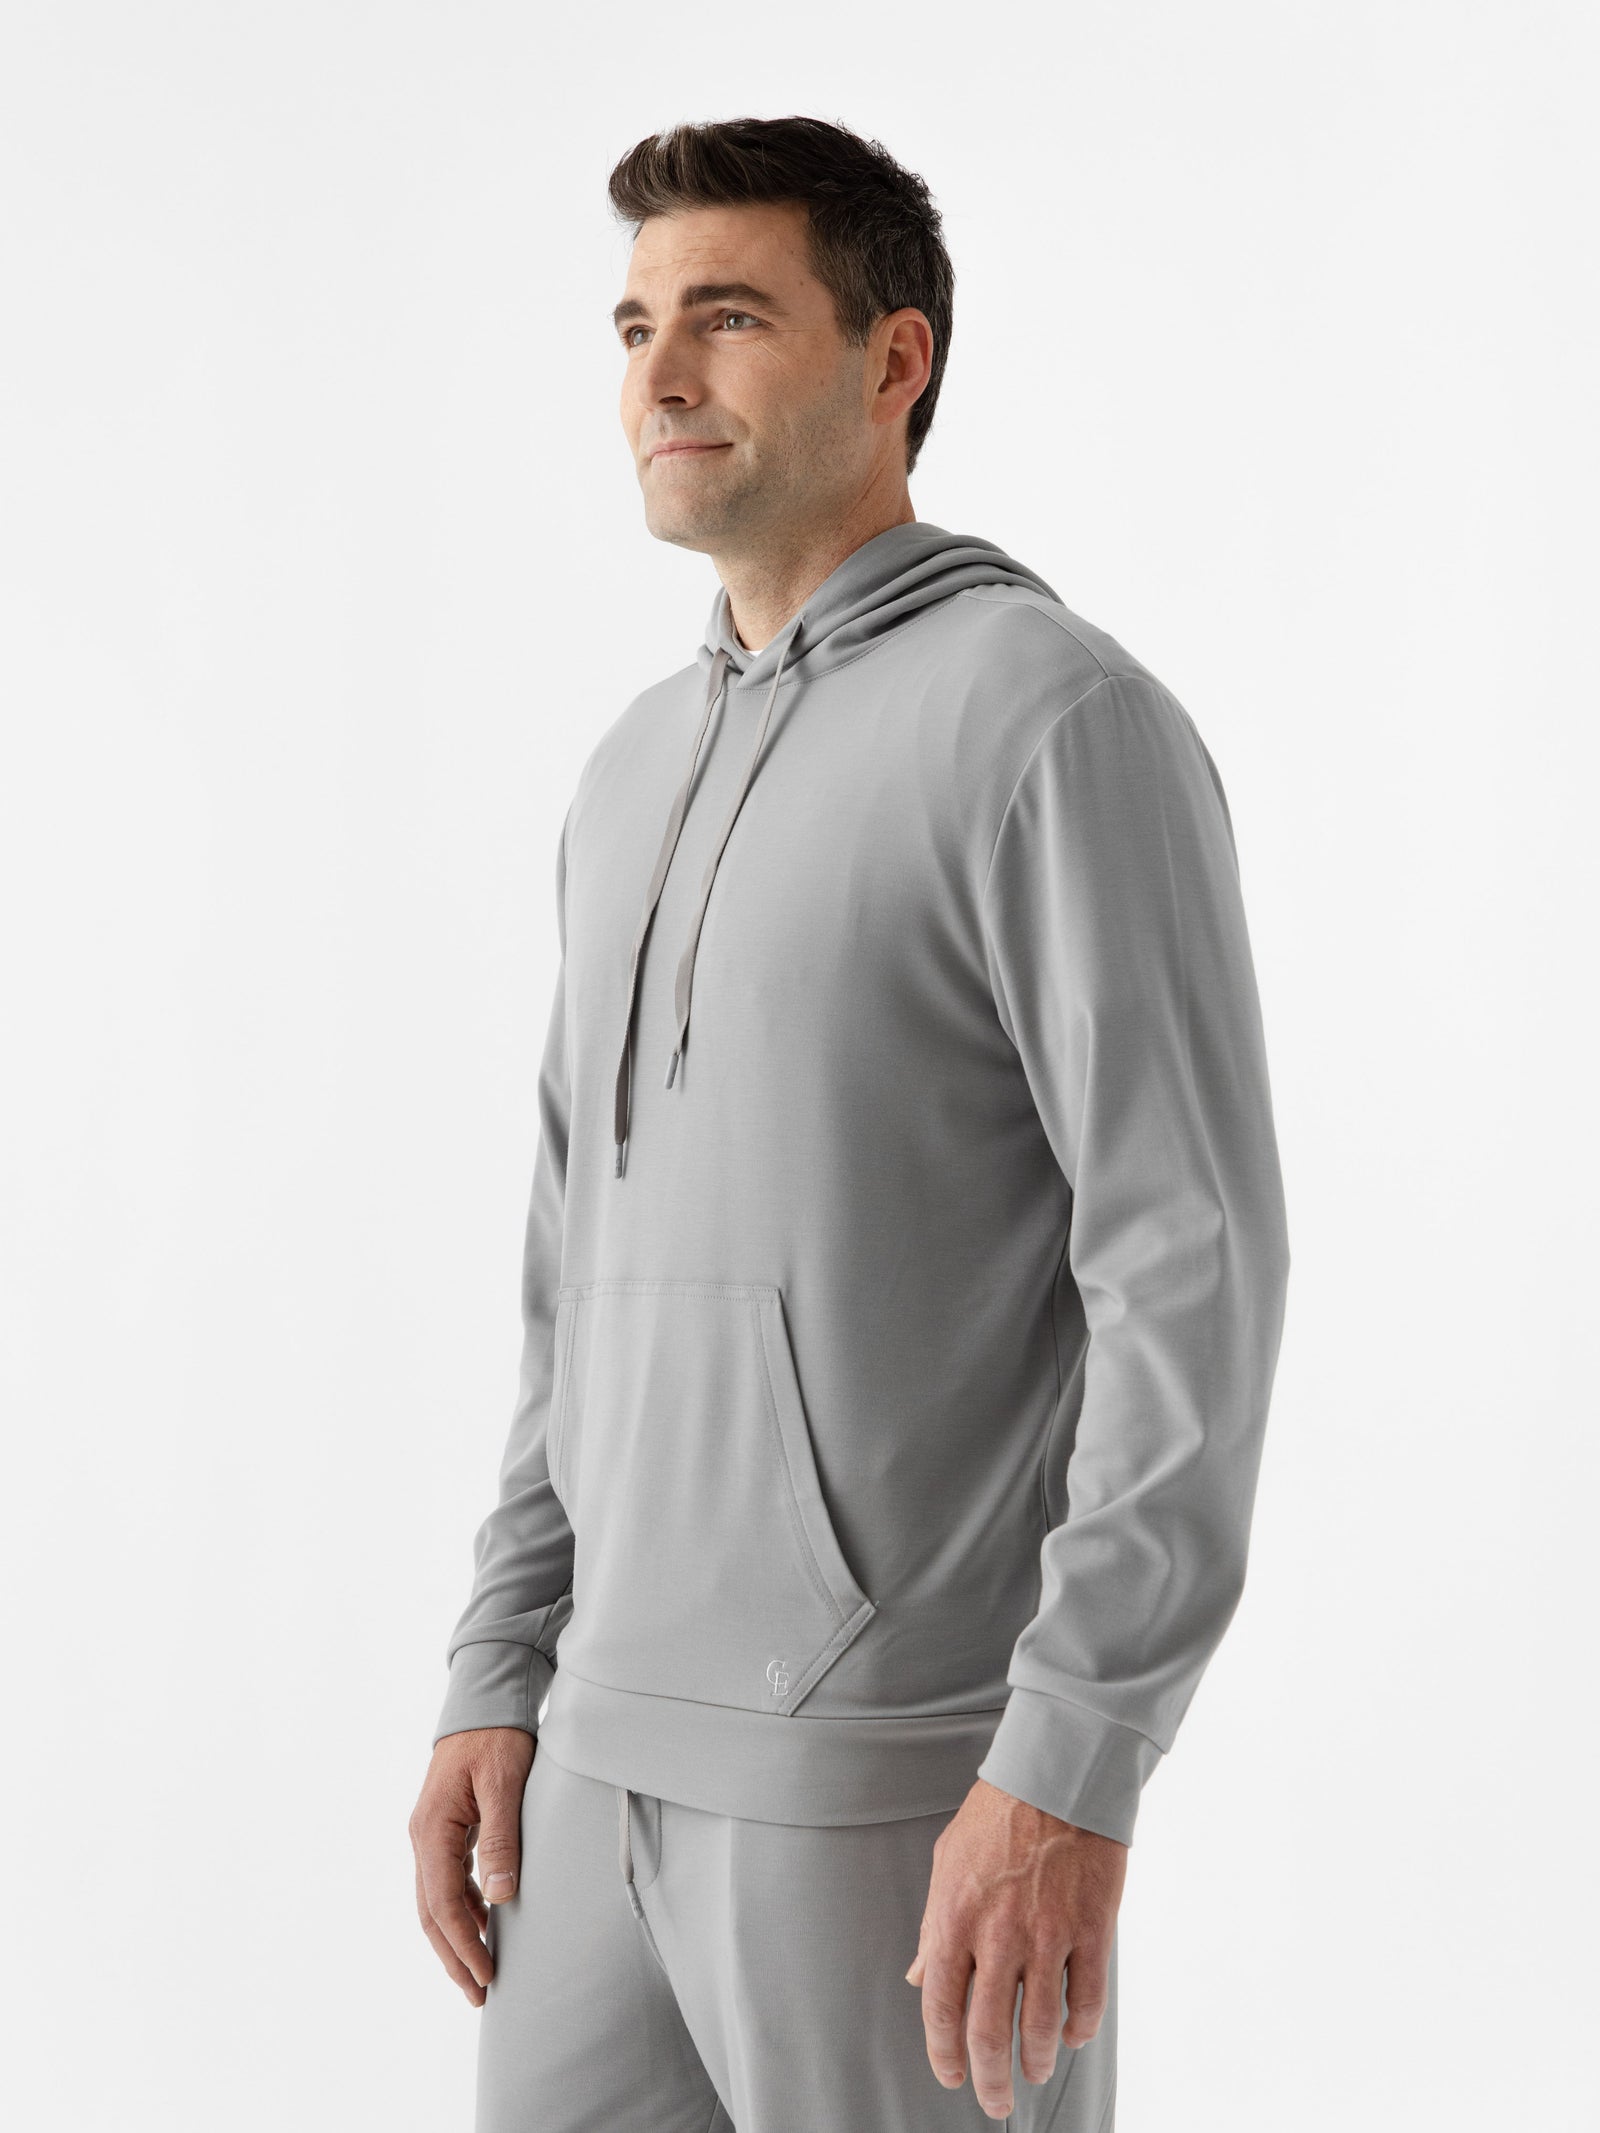 Stone Bamboo Hoodie worn by man standing in front of white background.